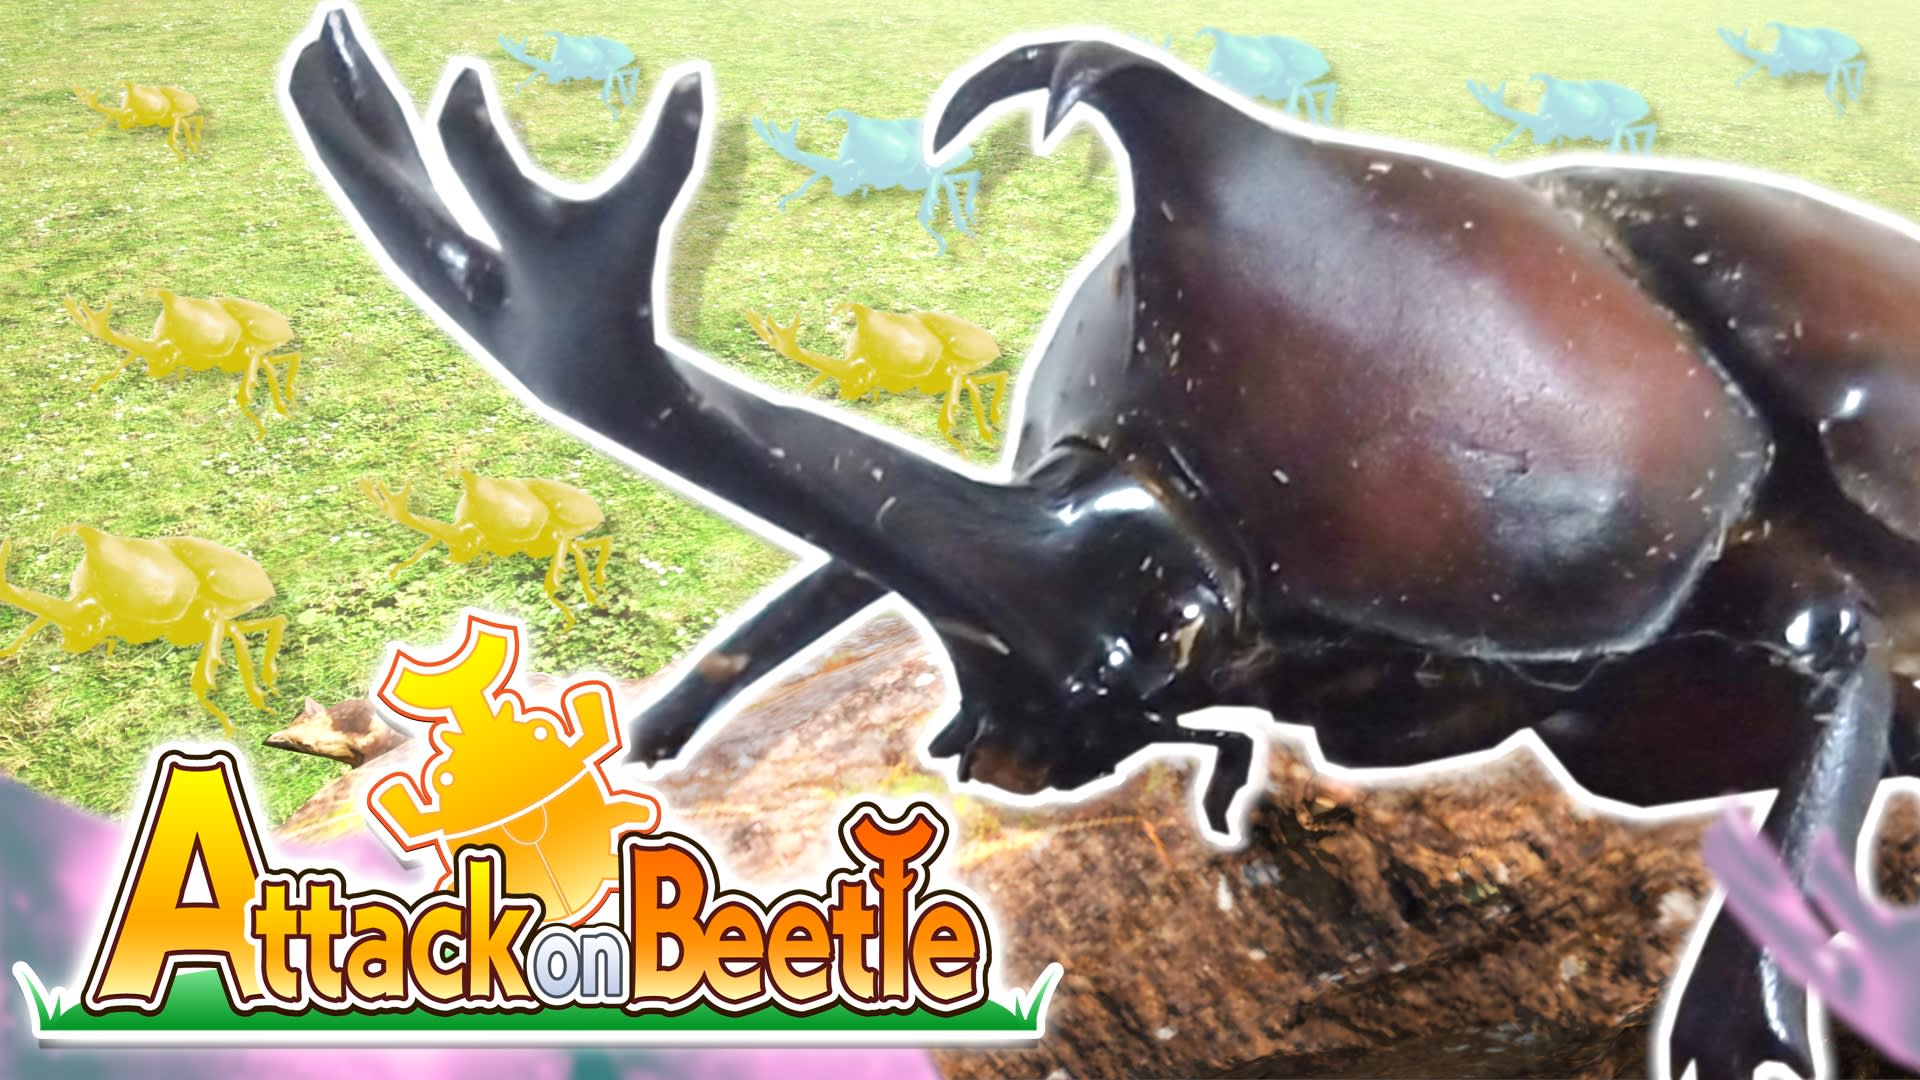 Attack on Beetle